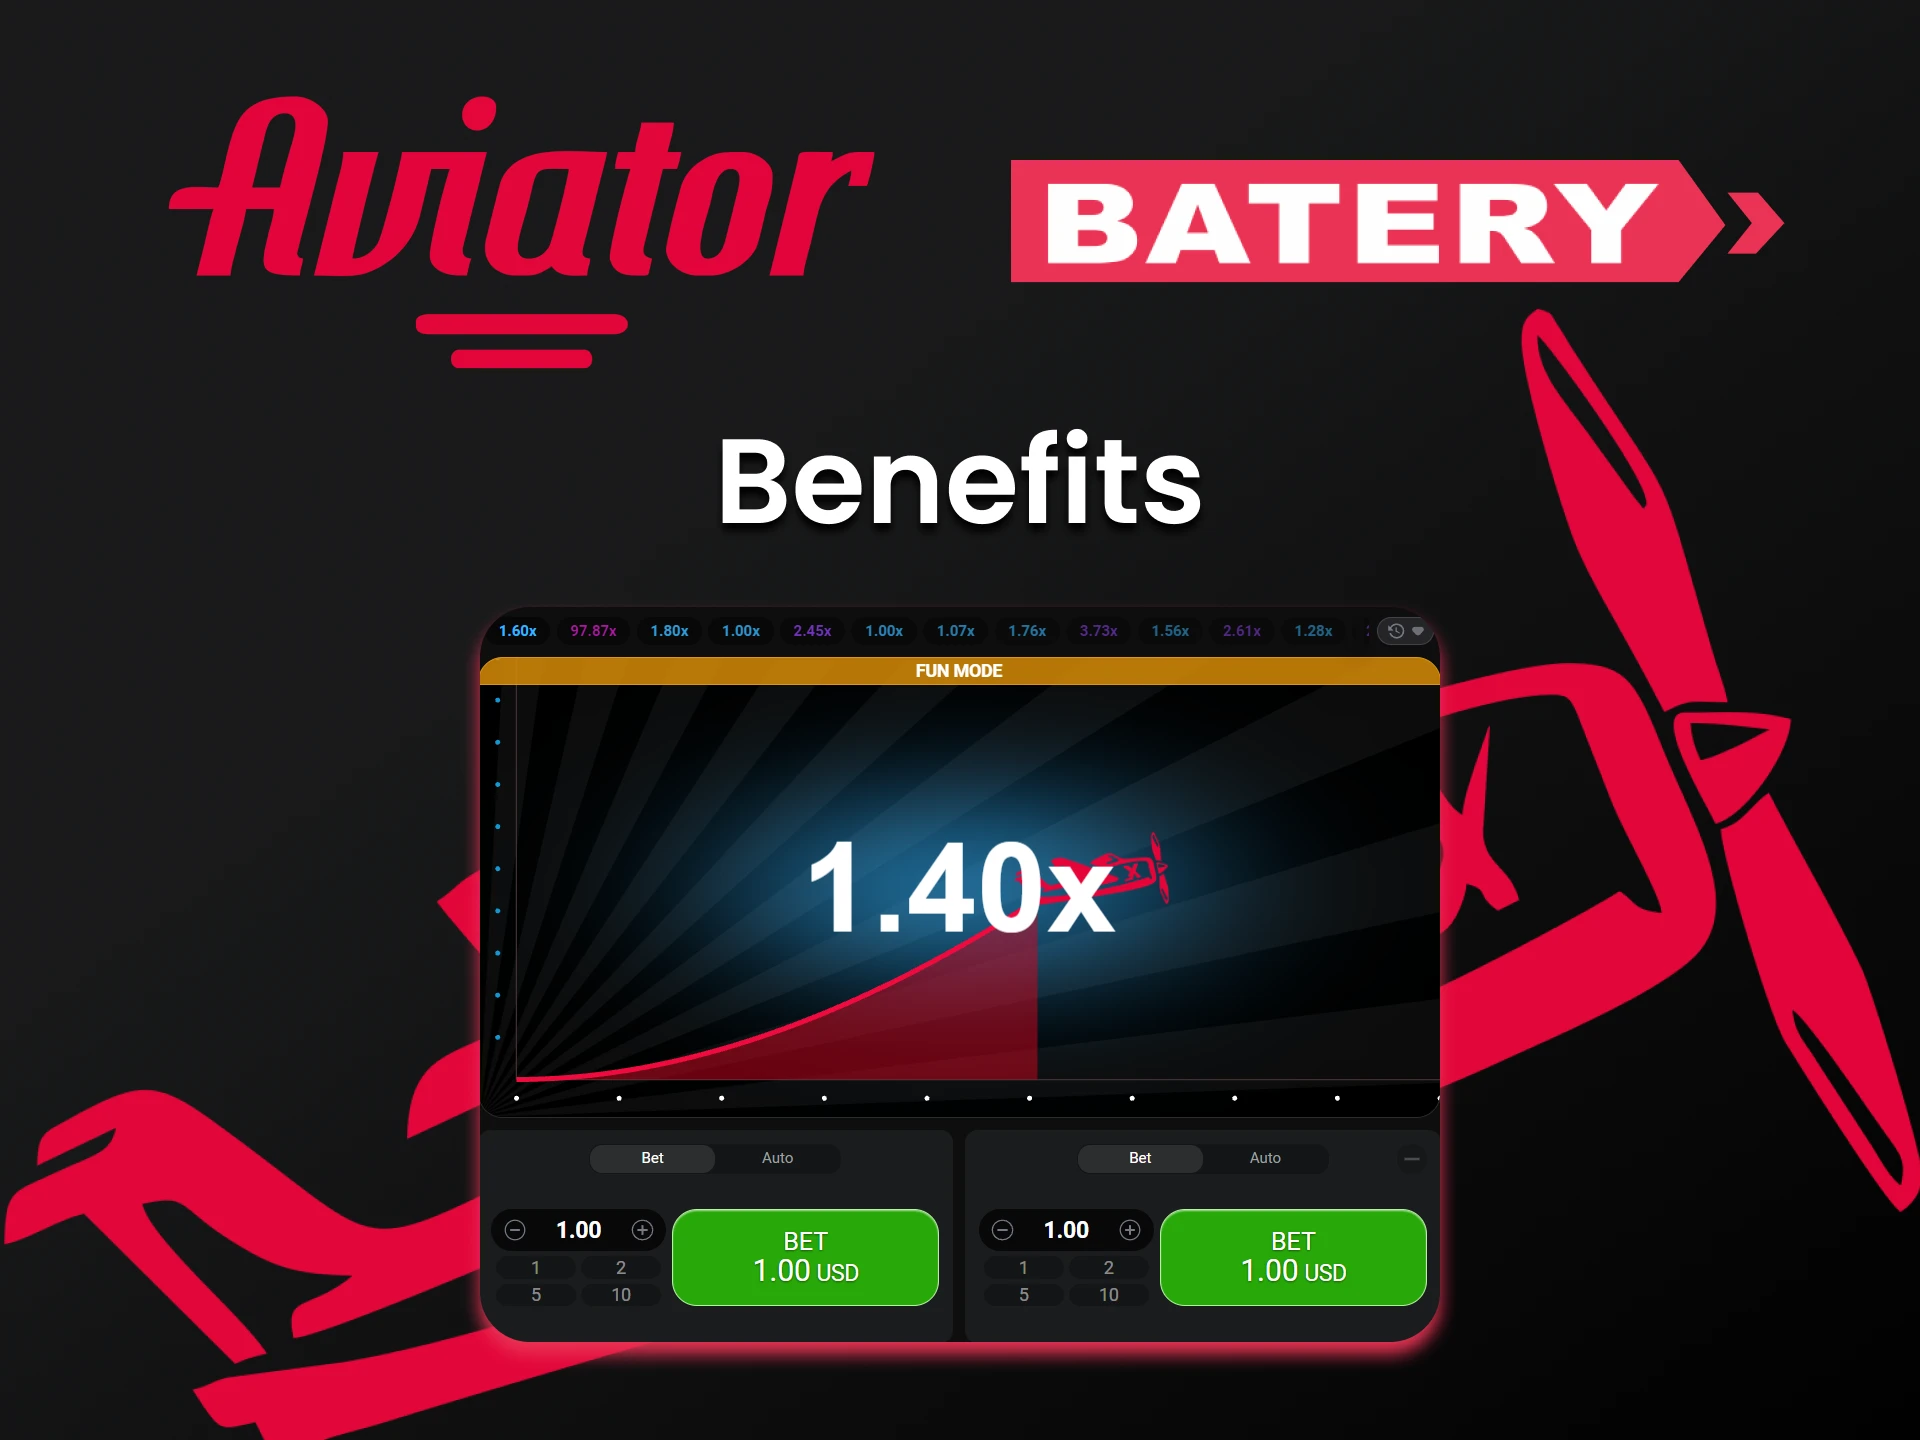 You will get many benefits by playing Aviator on Batery.